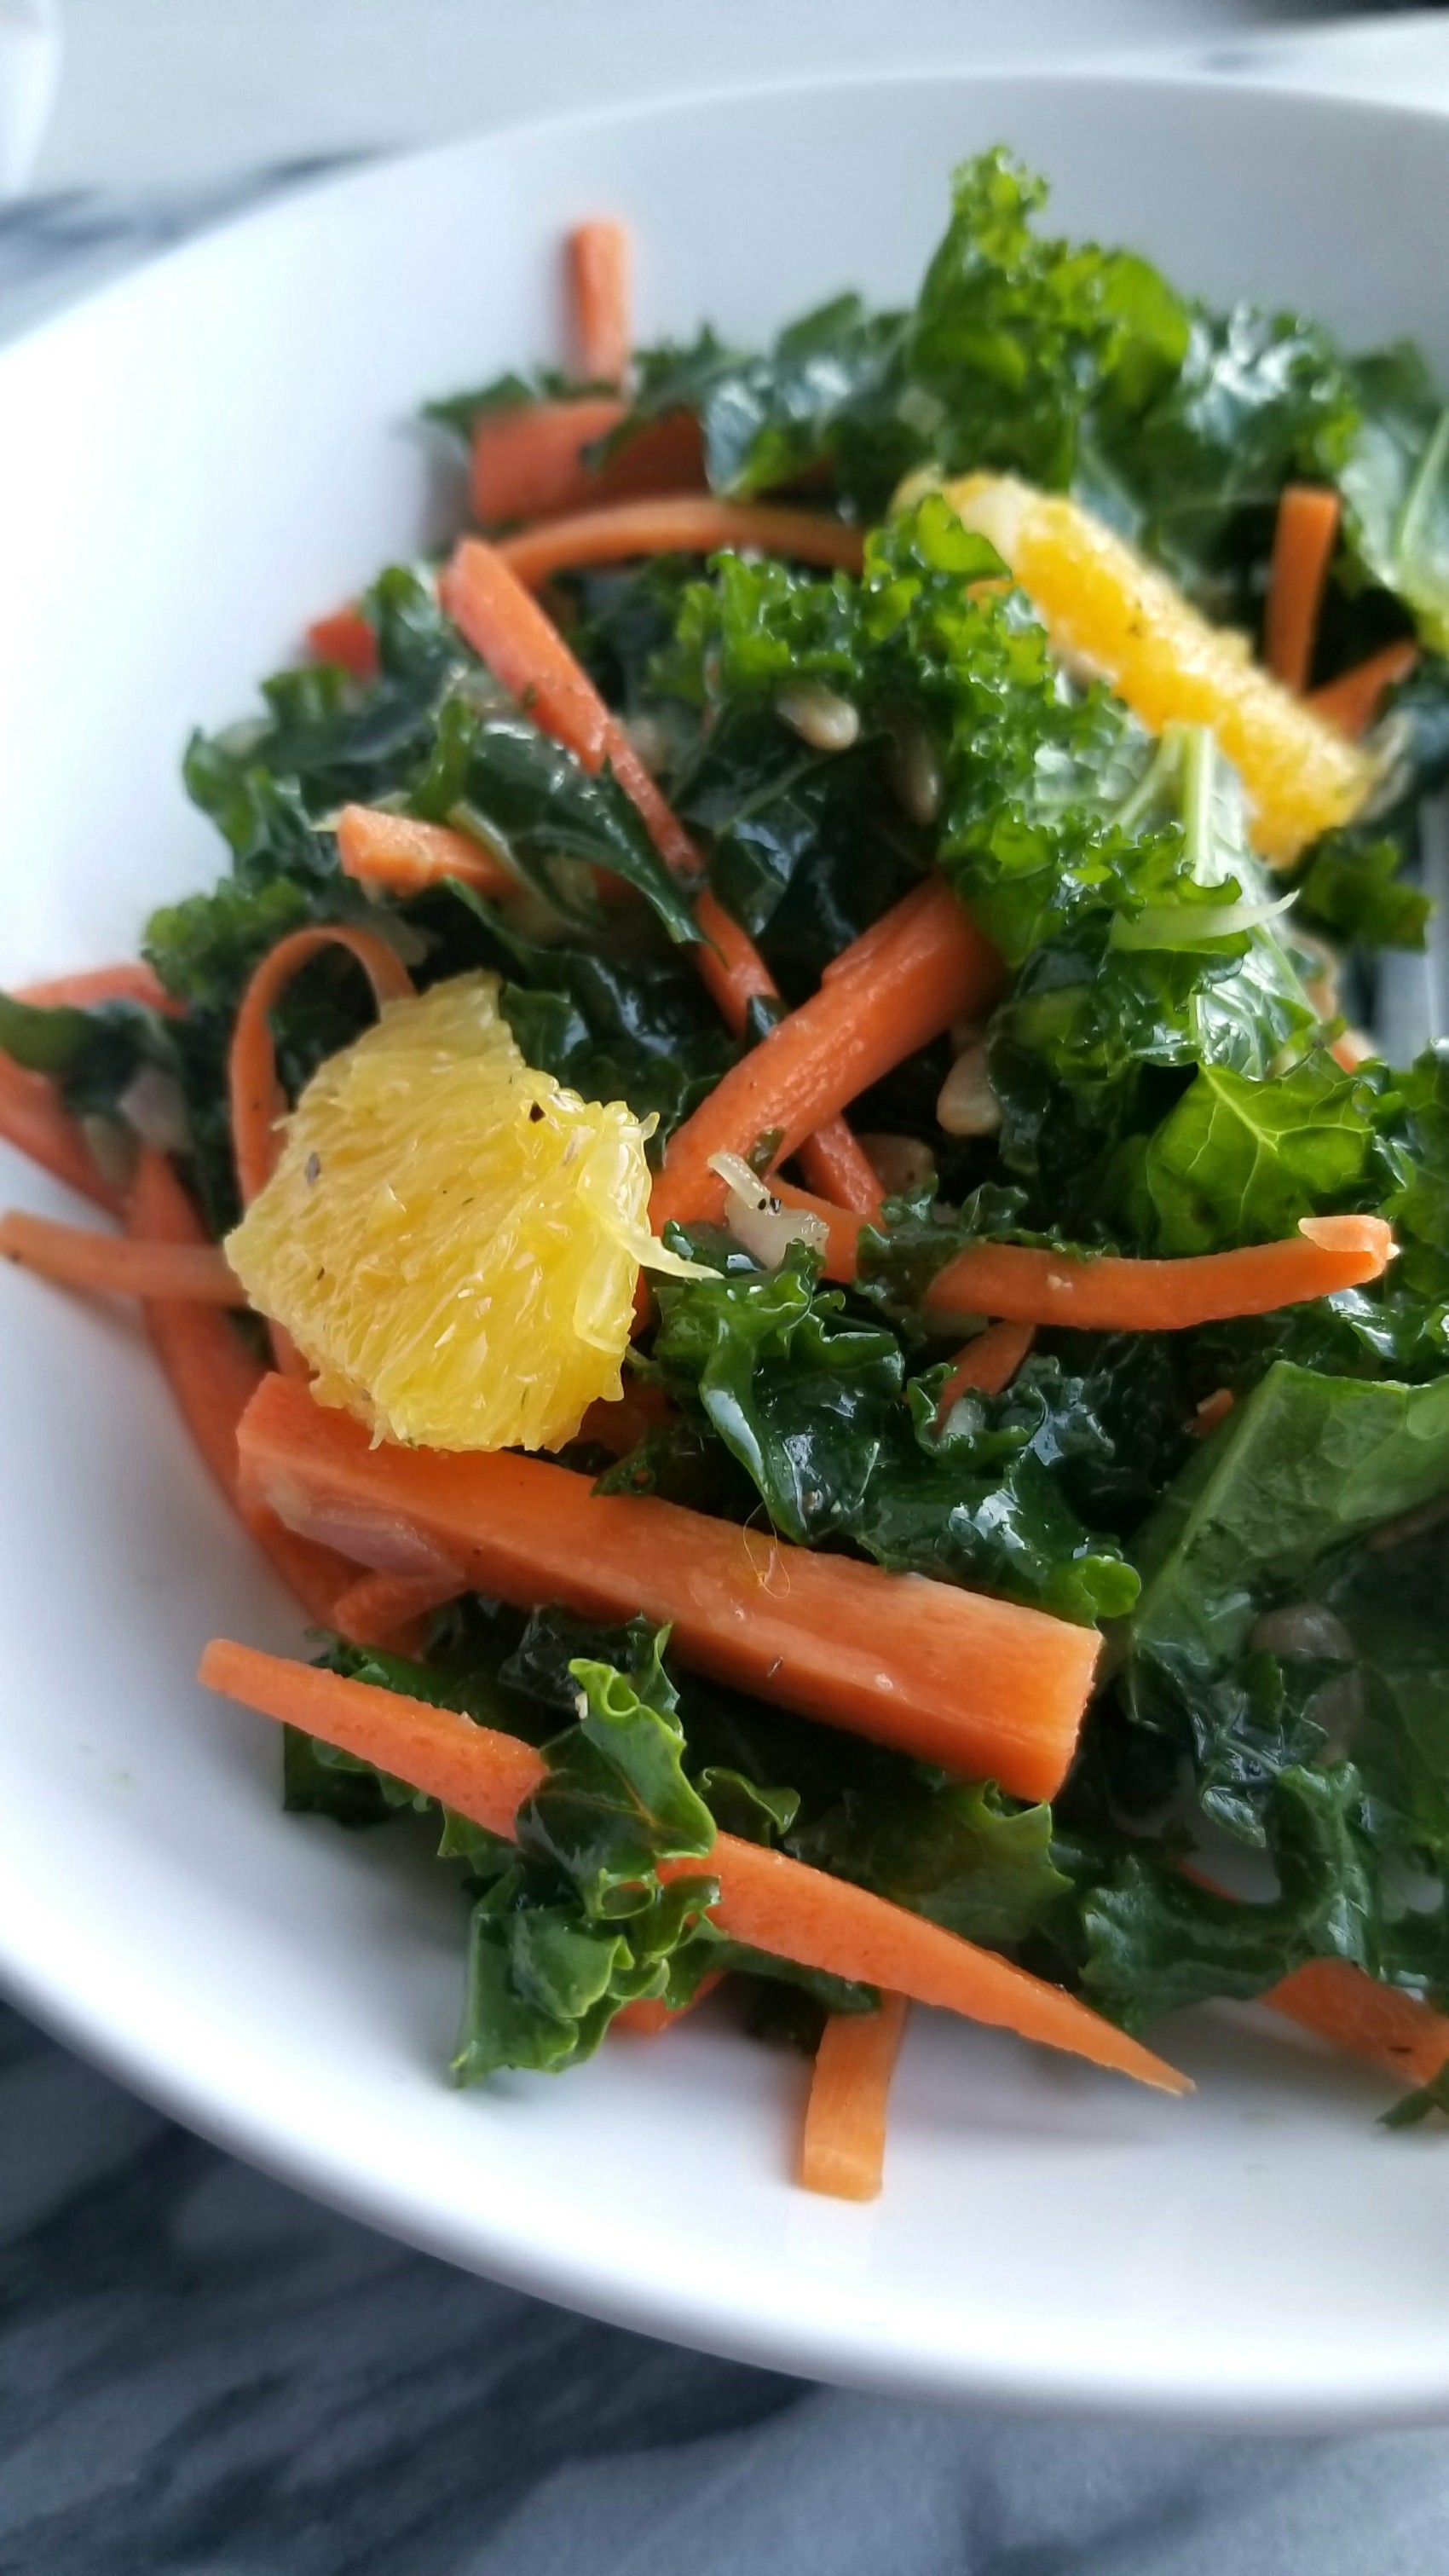 Kale Salad with Oranges, Carrots and Sunflower Seeds